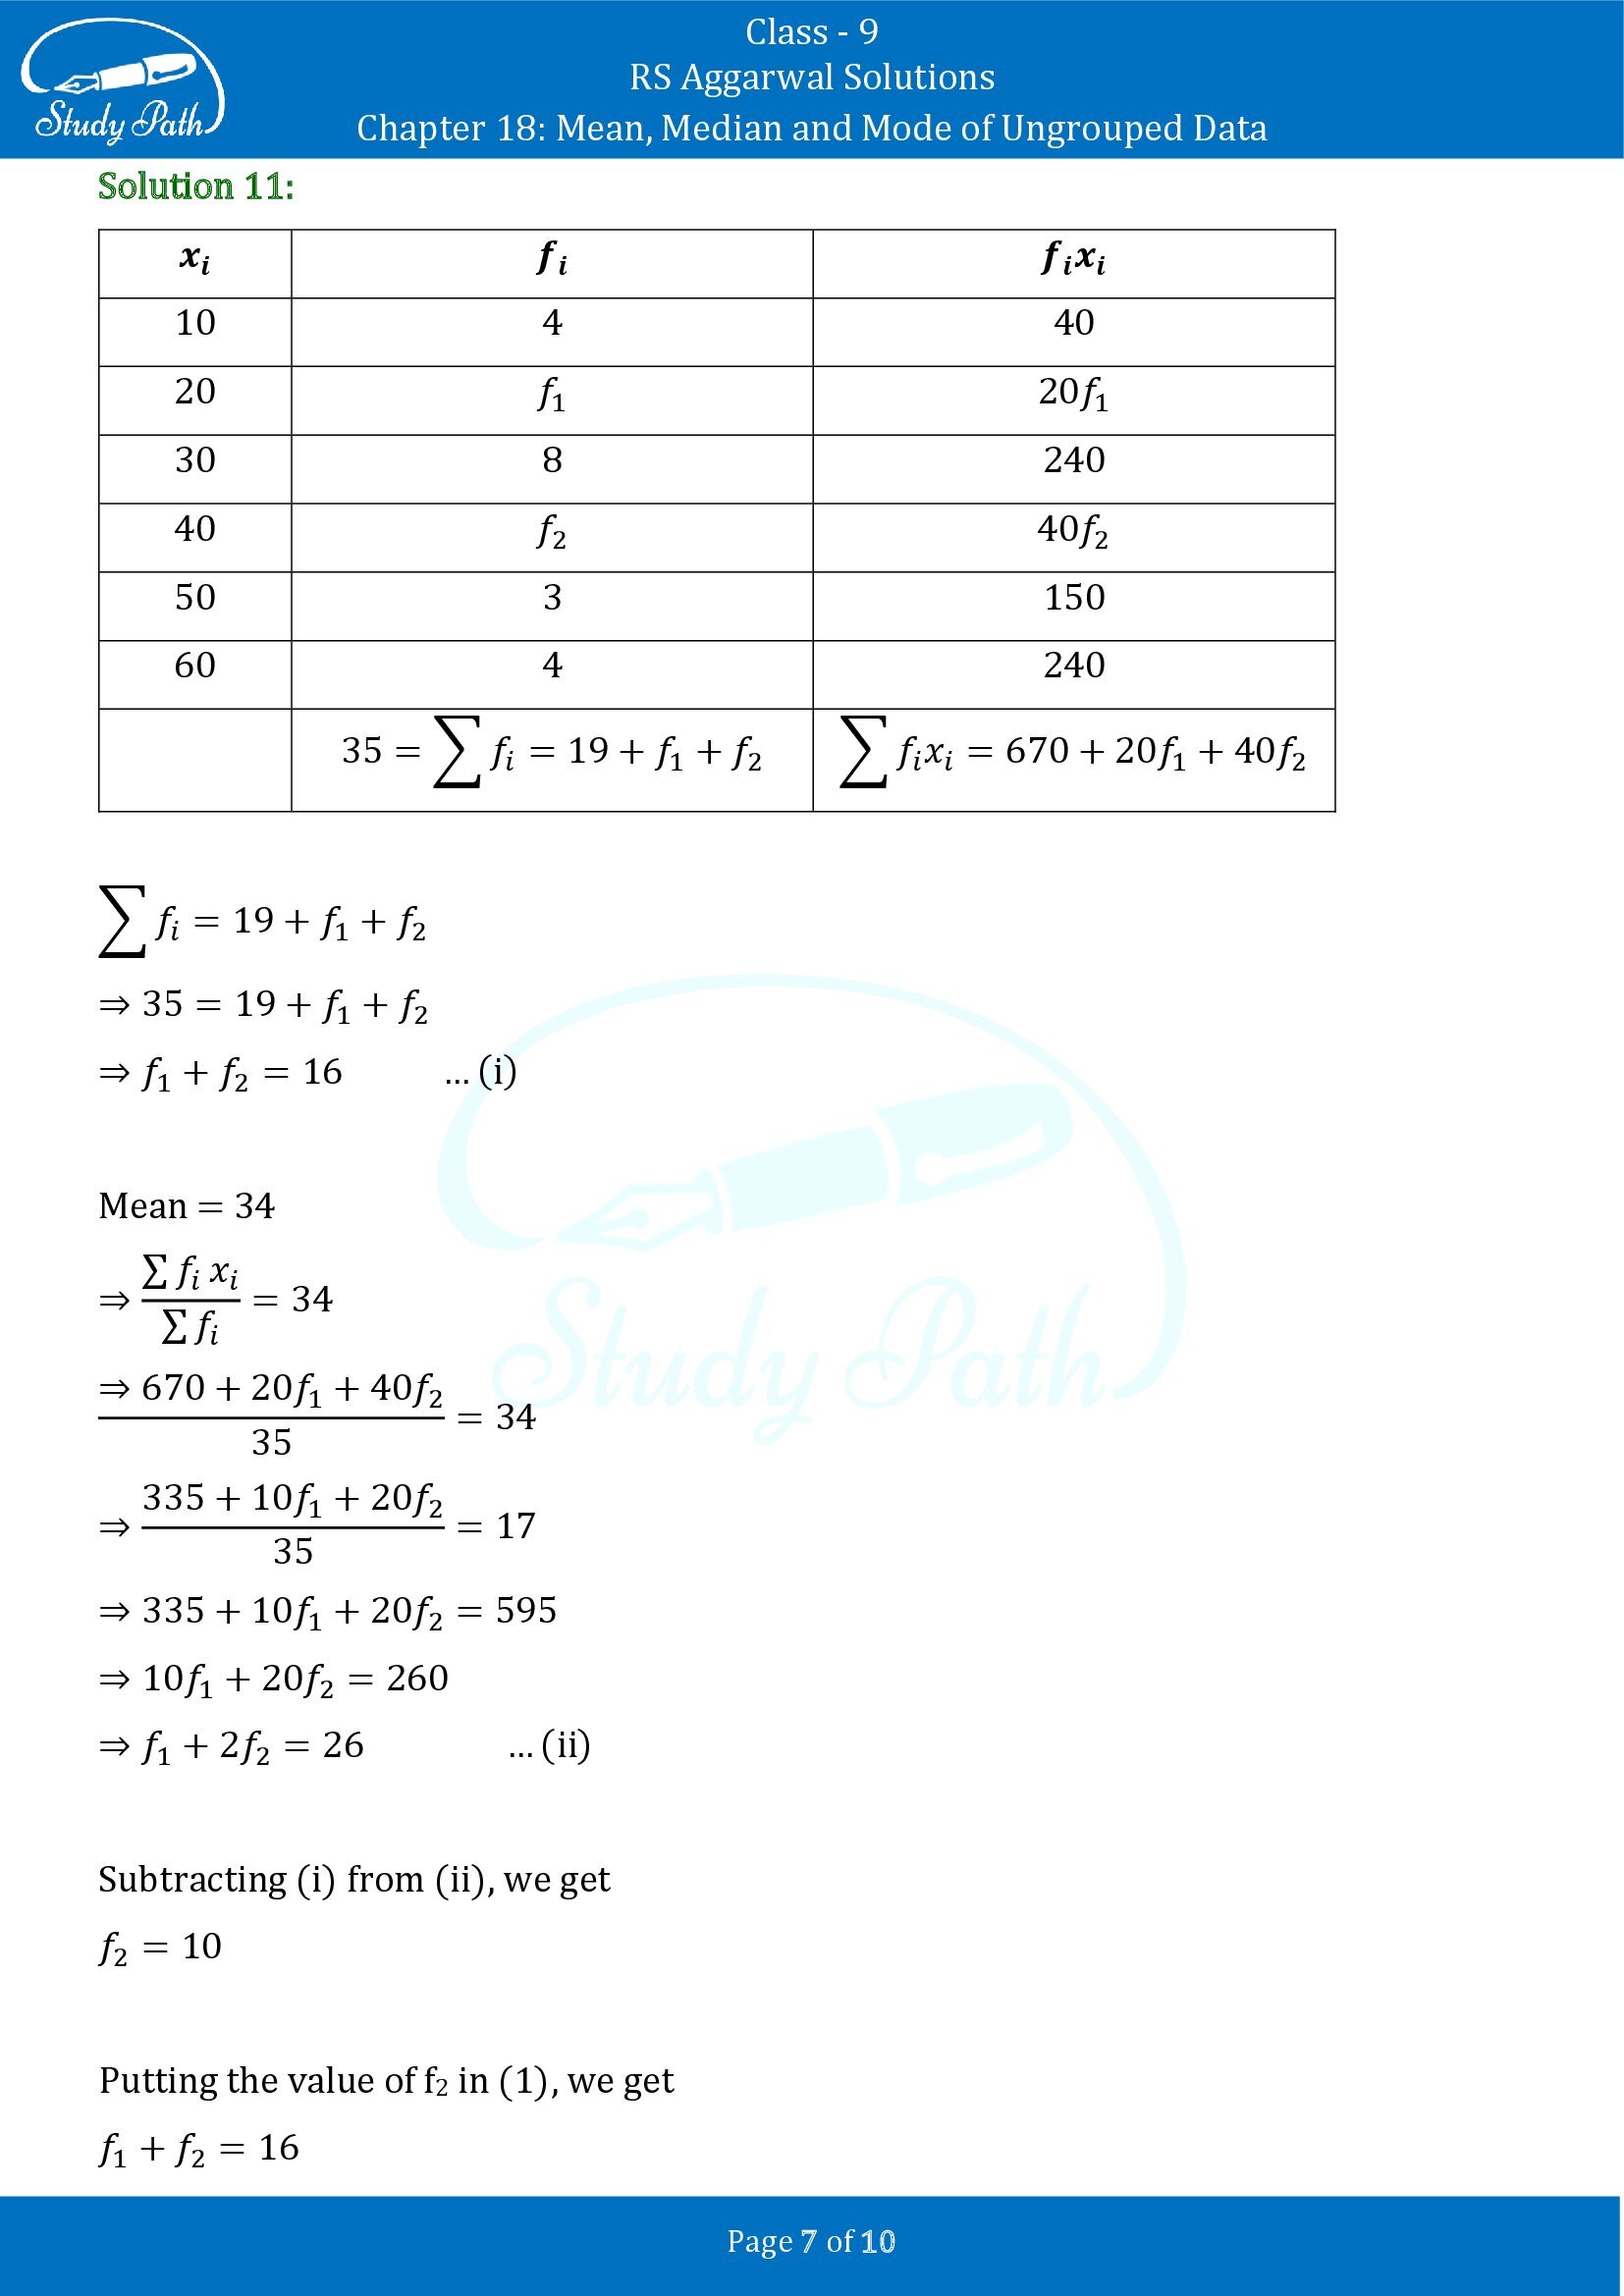 RS Aggarwal Solutions Class 9 Chapter 18 Mean Median and Mode of Ungrouped Data Exercise 18B 00007